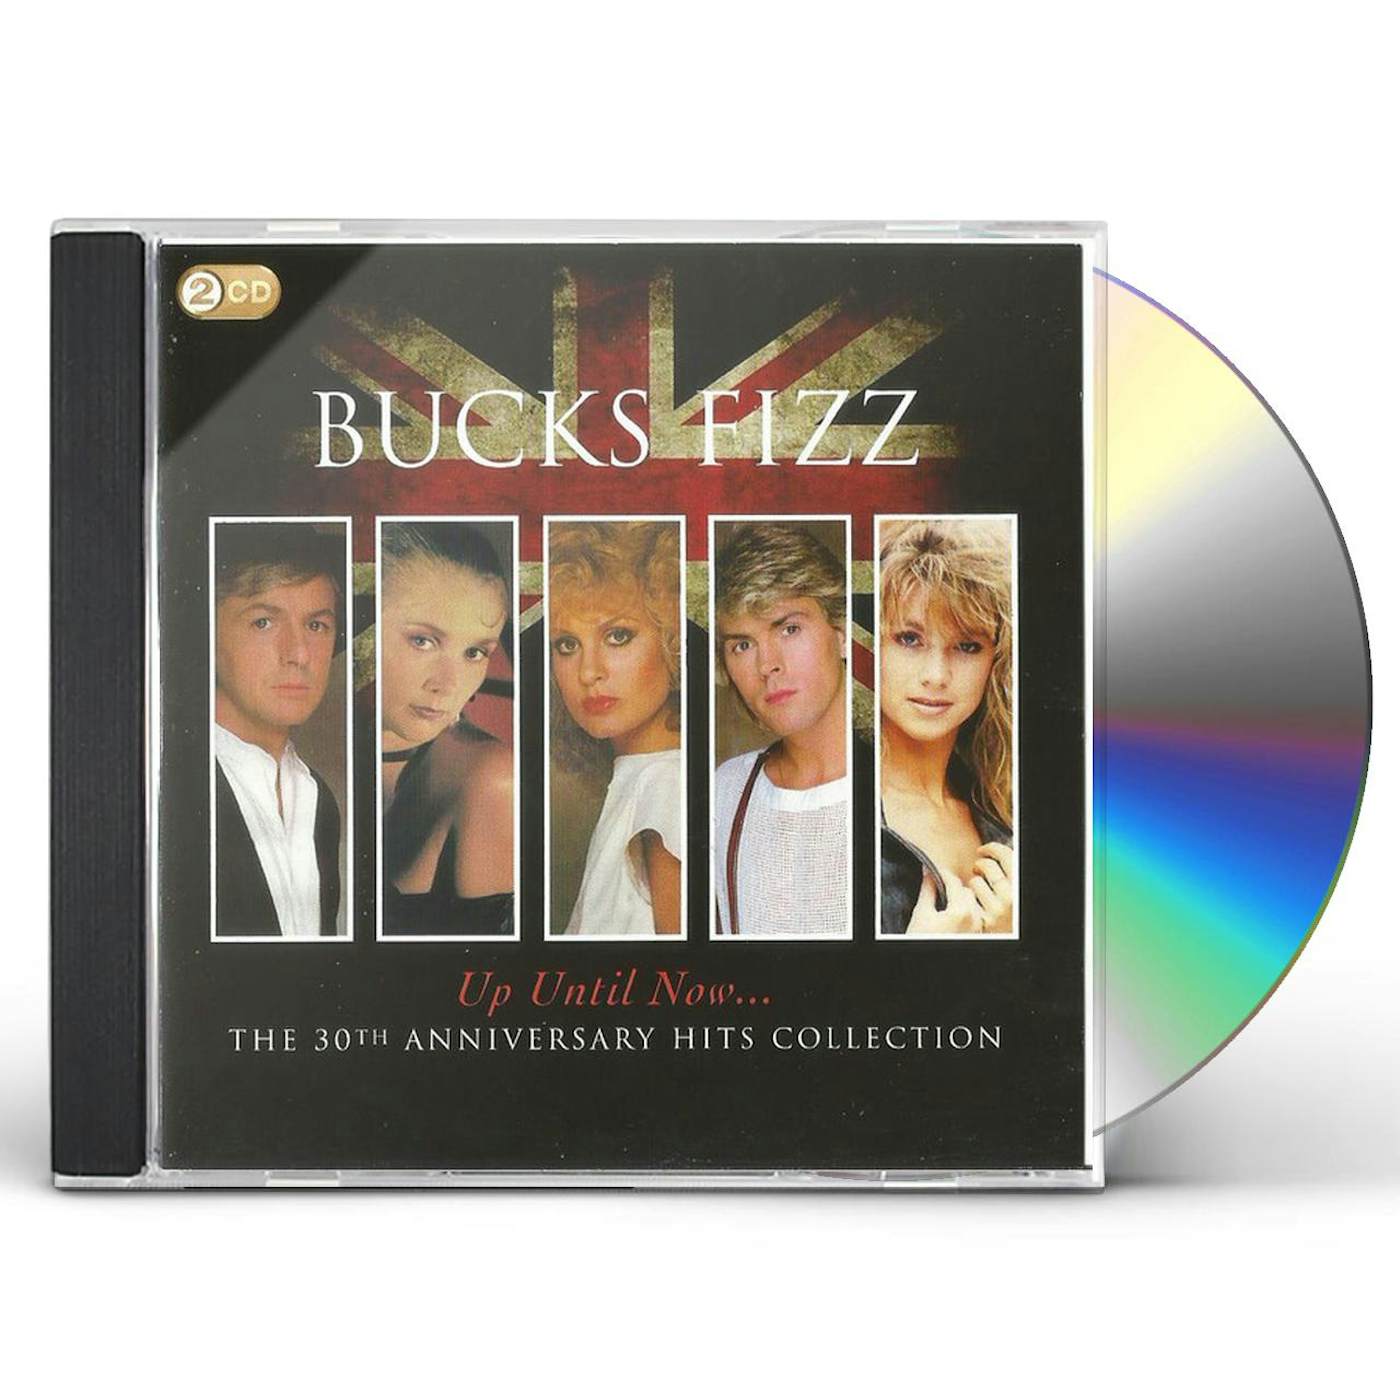 Bucks Fizz UP UNTIL NOW: 30TH ANNIVERSARY HITS COLLECTION CD